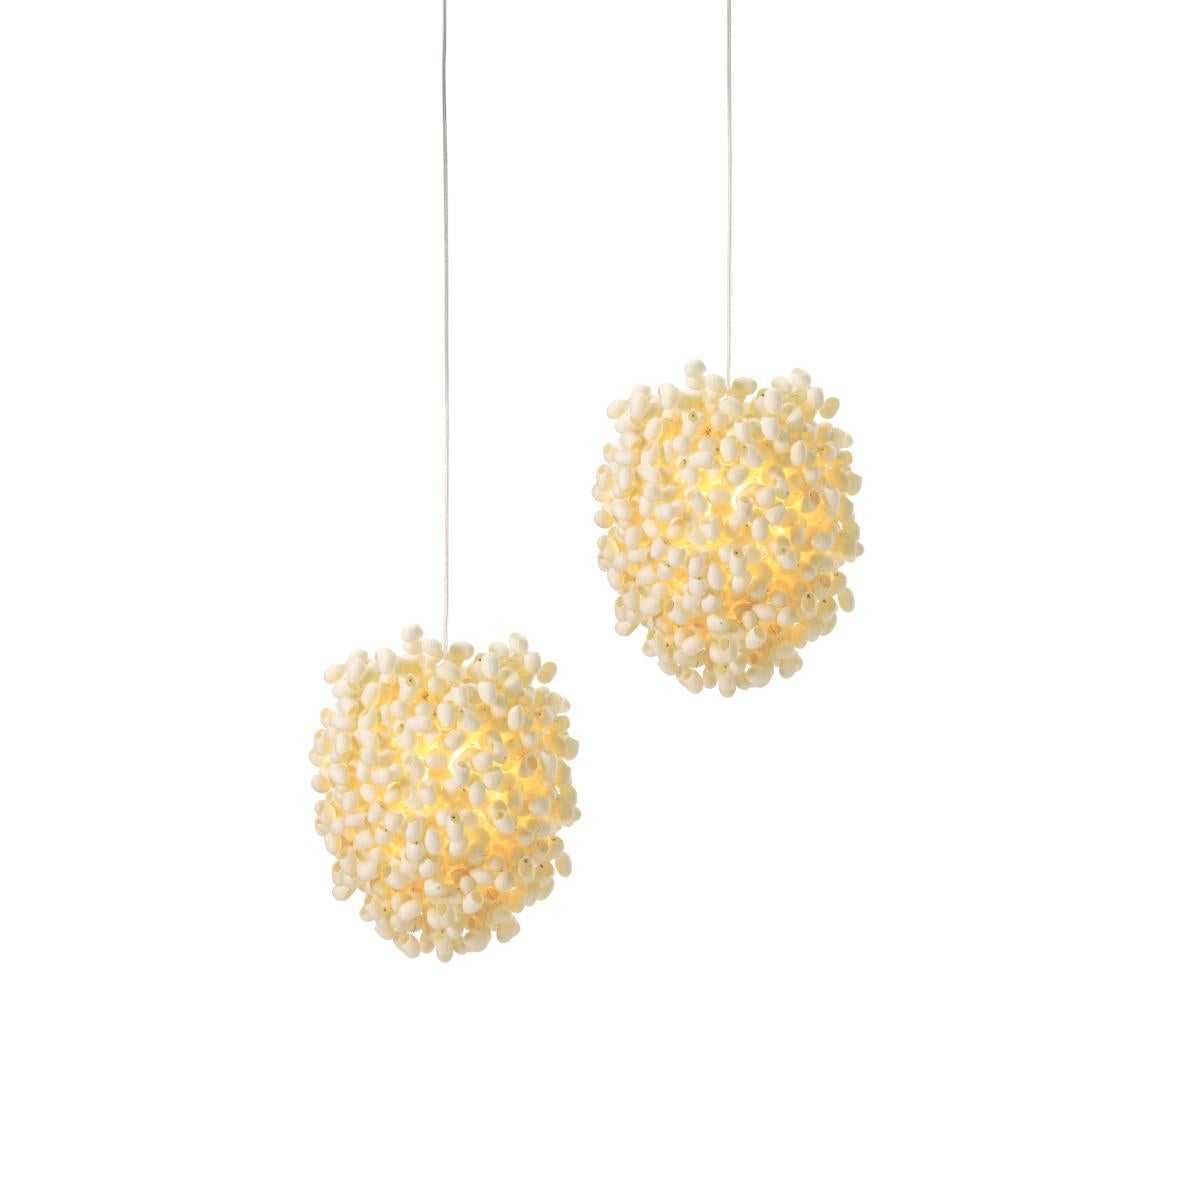 Cascadence ceiling light is uniquely created and handcrafted by Ango using individual hand-selected silk cocoons. The design continues Angos’ narrative of fusing nature and technology, with the diffuser in an ovoid form composed of natural silk